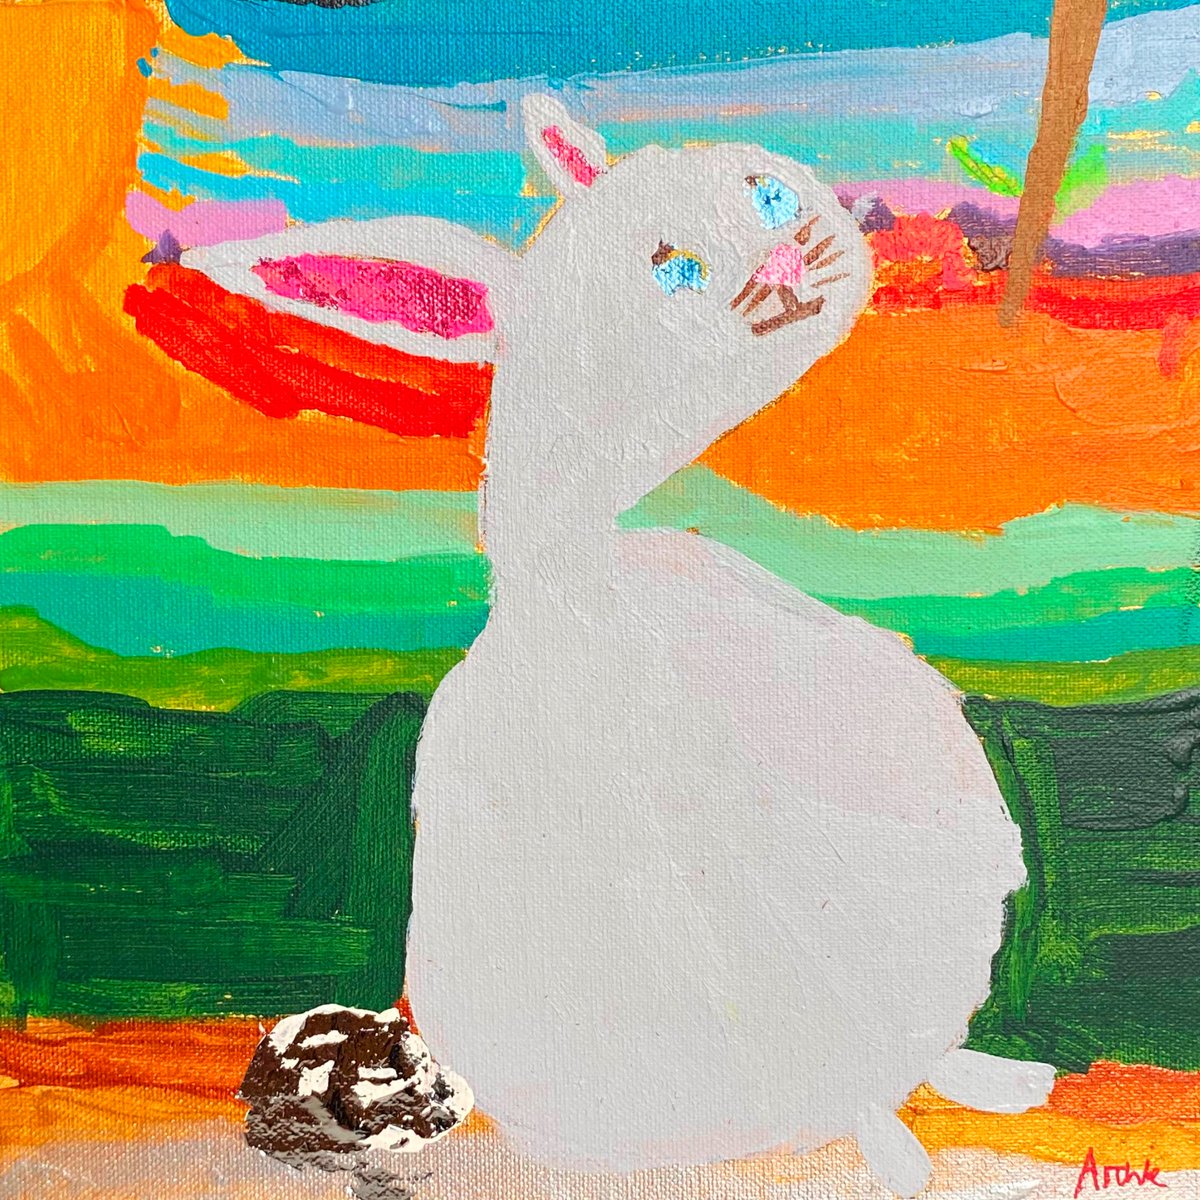 Happy Easter from Delight 🐰
Look at this amazing bunny artwork from a Delight in Watts pupil!
@WattsGallery @HannahPaintbox #DelightinWatts